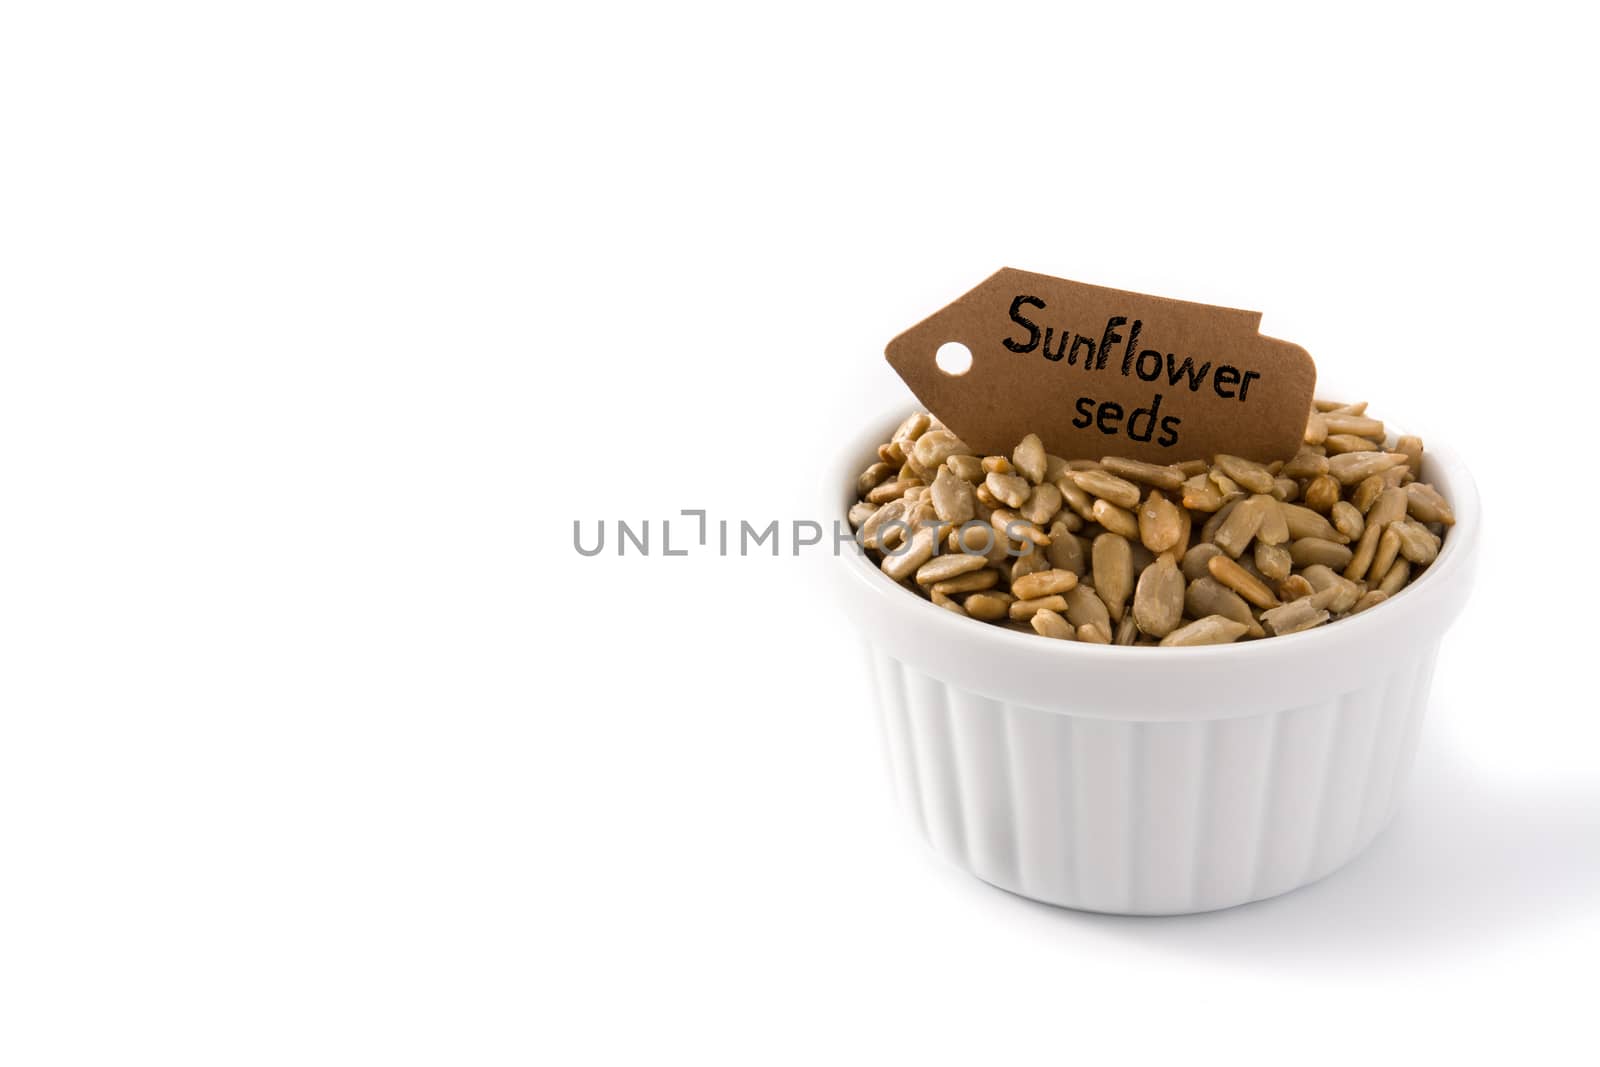 Sunflower seeds in bowl  by chandlervid85